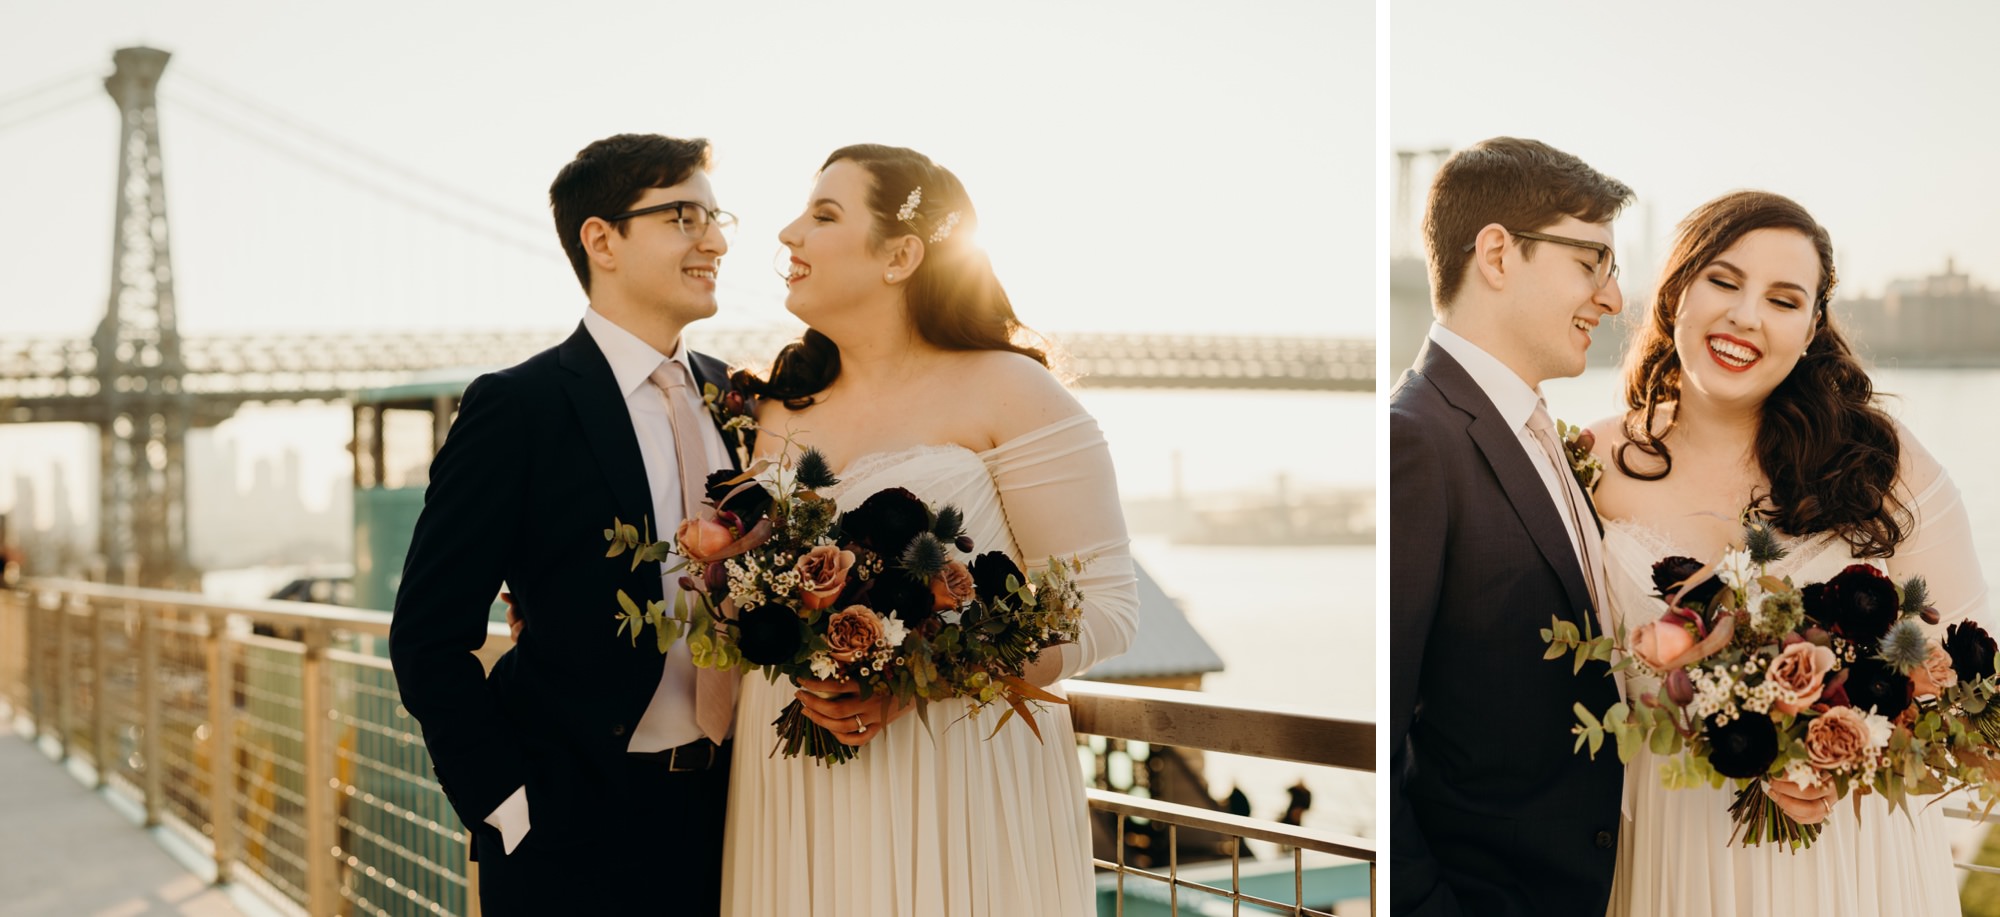 bride and groom wedding portraits at domino park in brooklyn, nyc